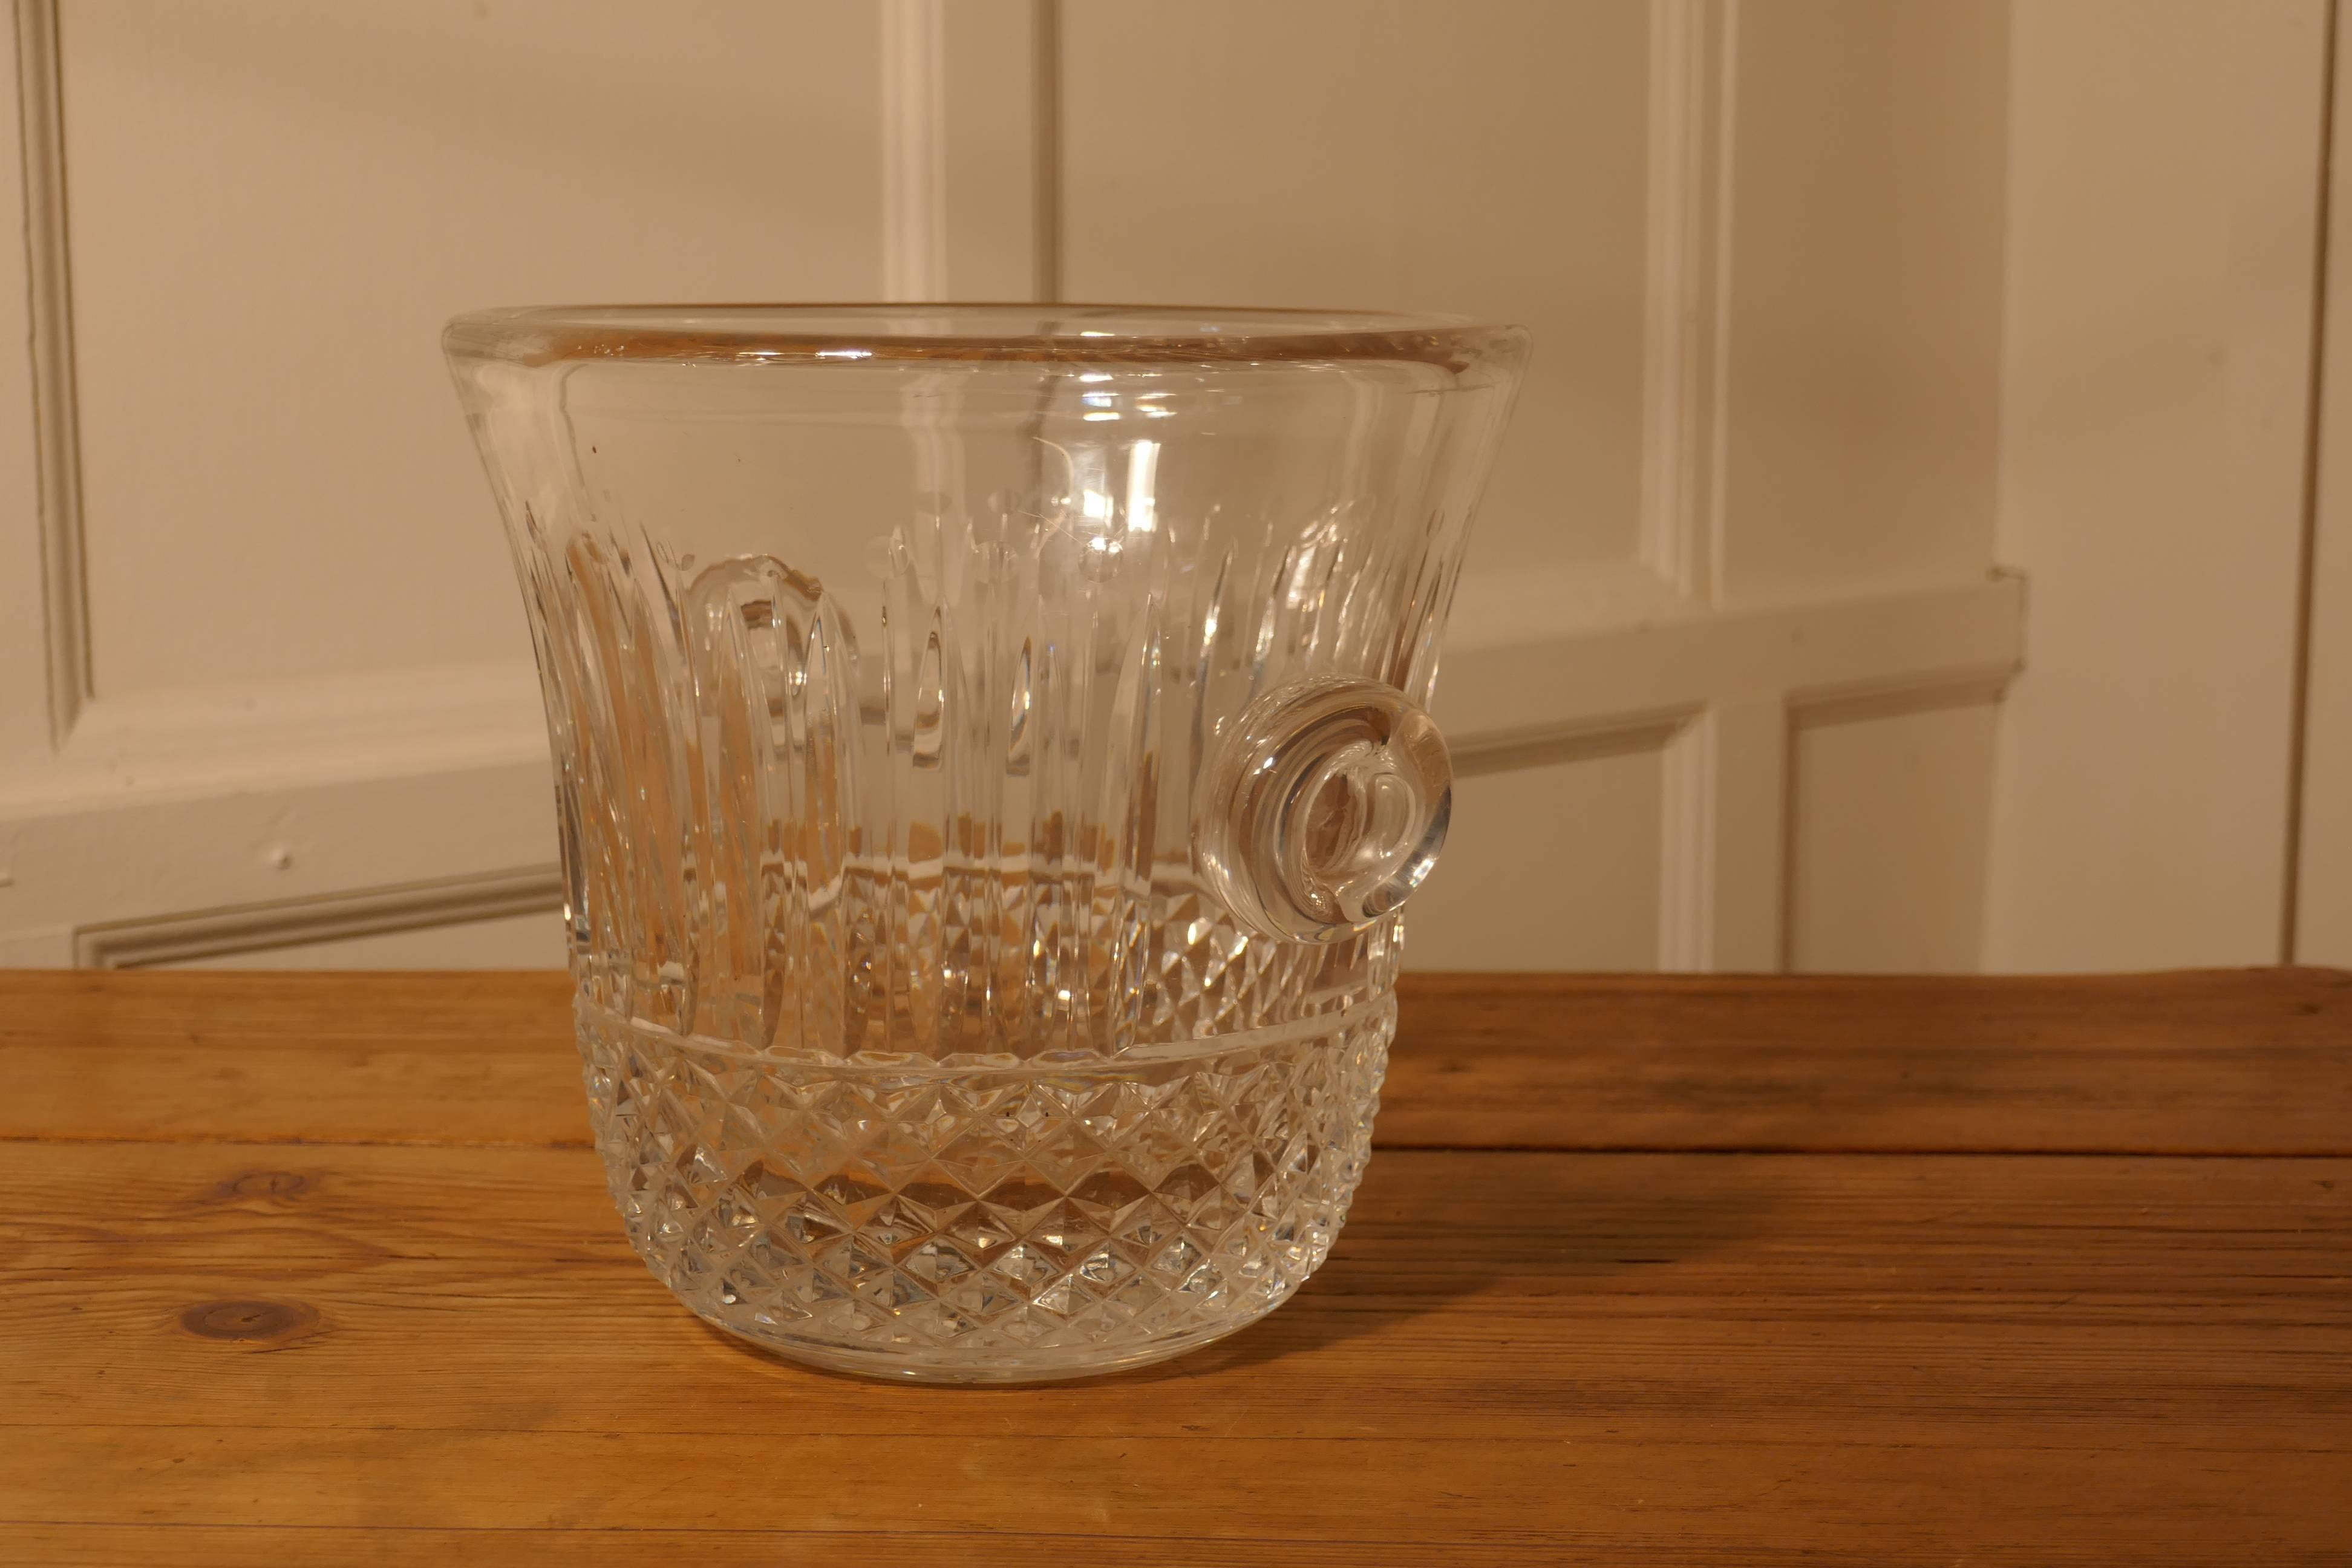 Saint-Louis crystal tommy ice bucket, hand-cut French crystal wine cooler

Tommy, is the favourite design from Saint-Louis since 1928, it has straight elegant lines
Founded in 1586, Saint-Louis crystal has a rich history as purveyors of fine